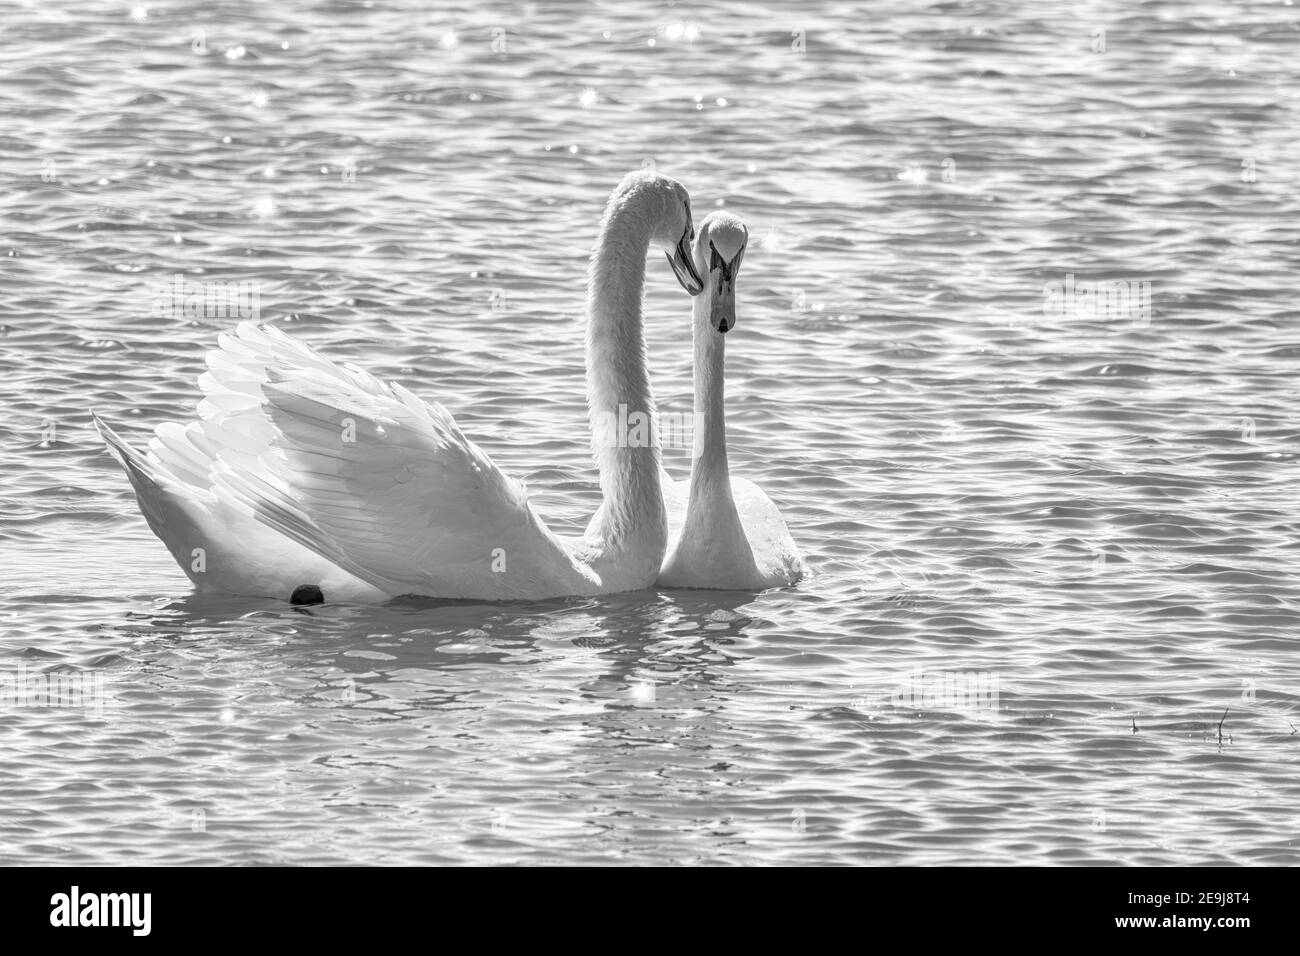 Mating games of a pair of white swans. Swans swimming on the water in nature. Valentine's Day background. The mute swan, latin name Cygnus olor. Stock Photo